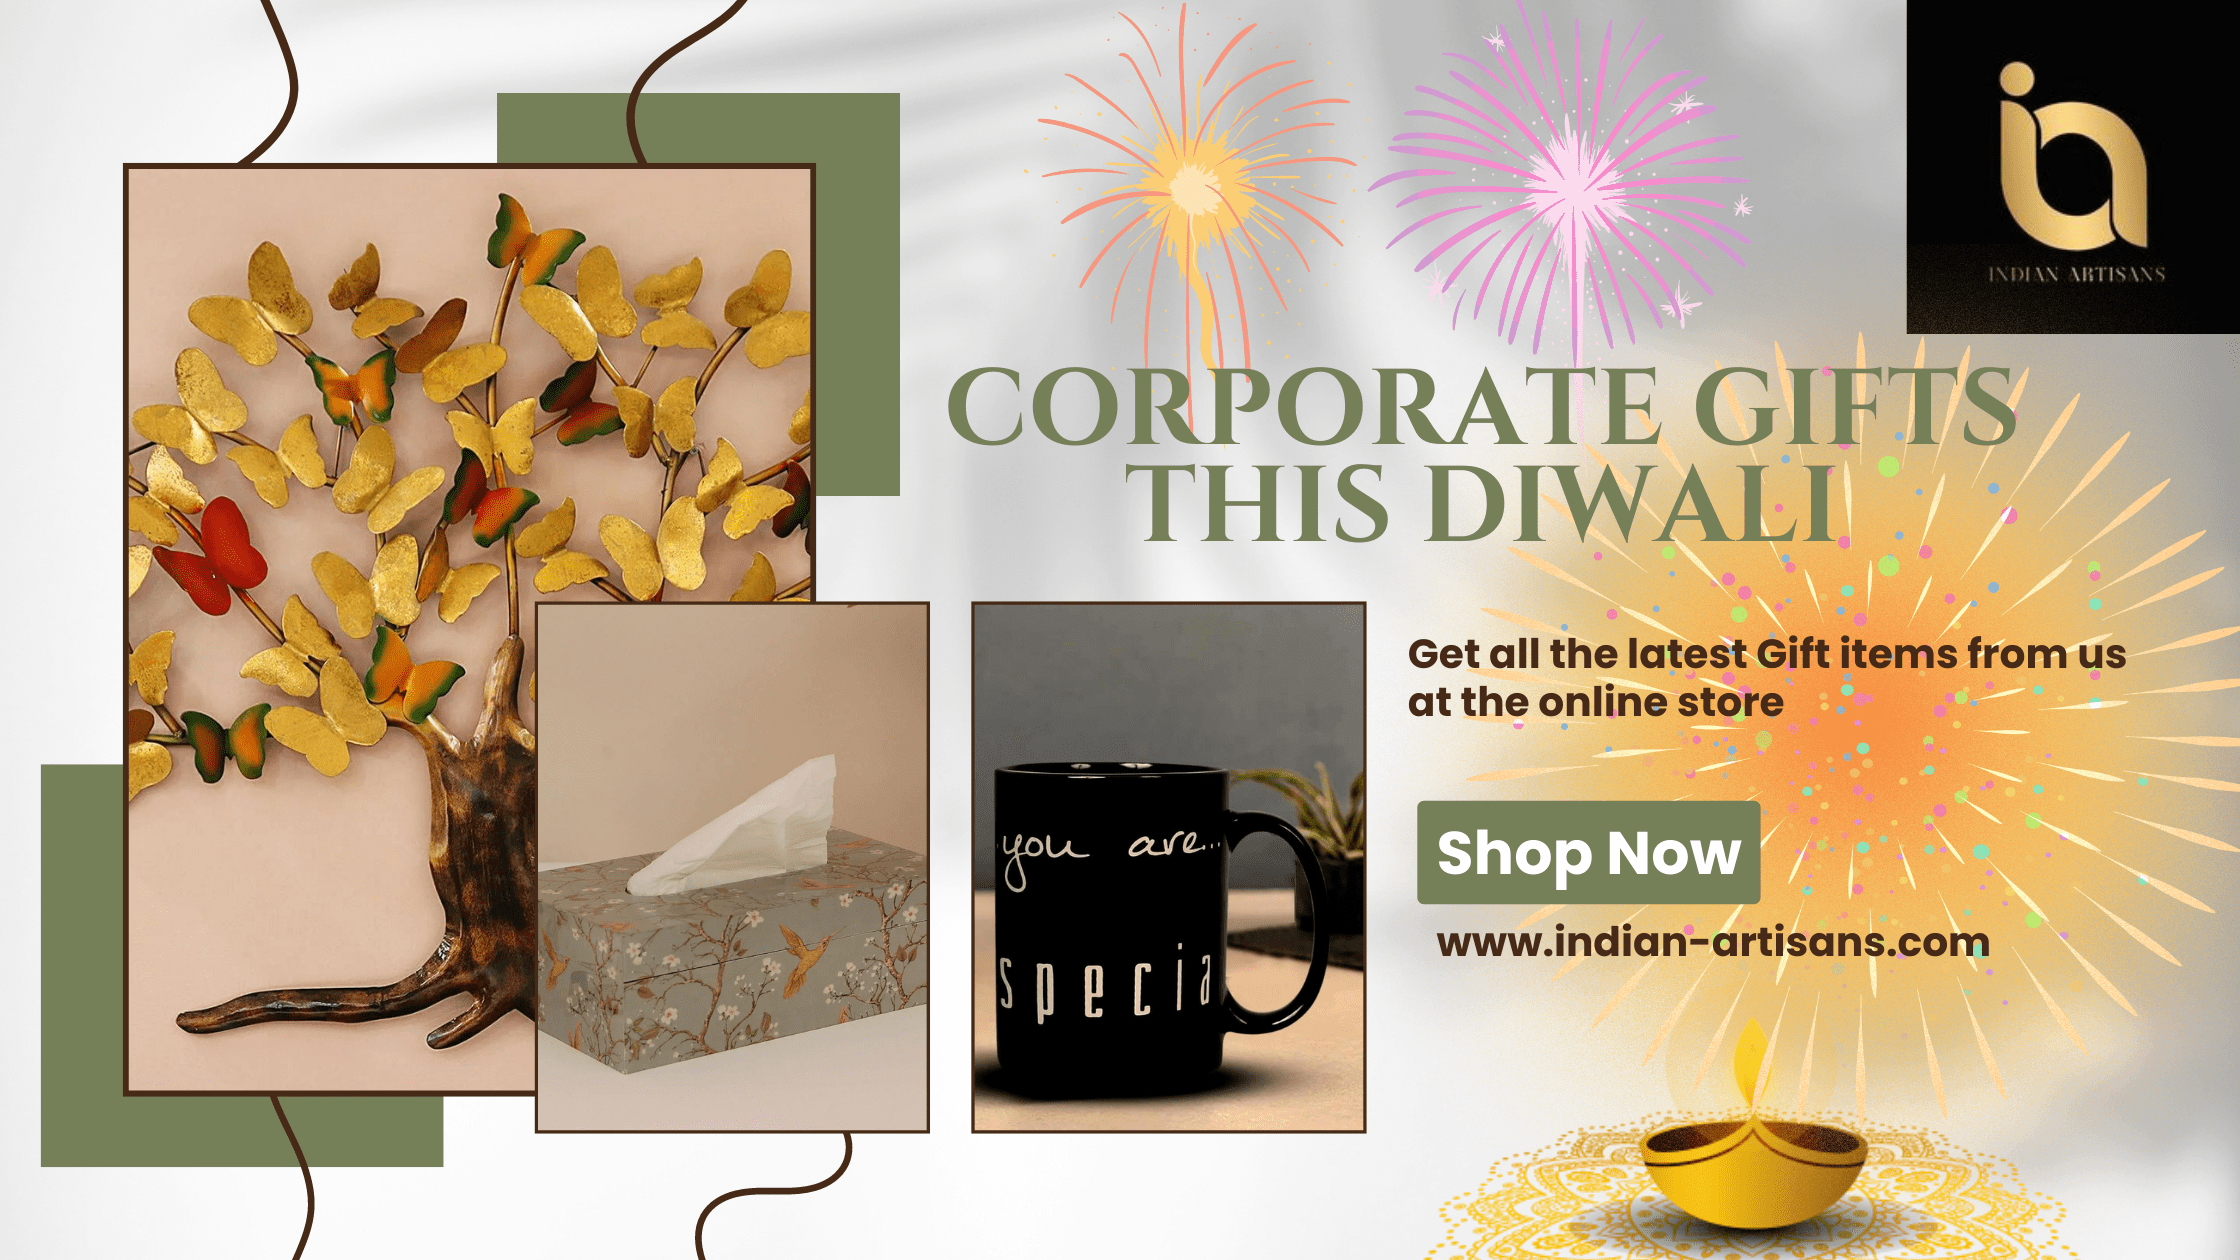 11 Personalized Corporate Gift Ideas That Will Impress